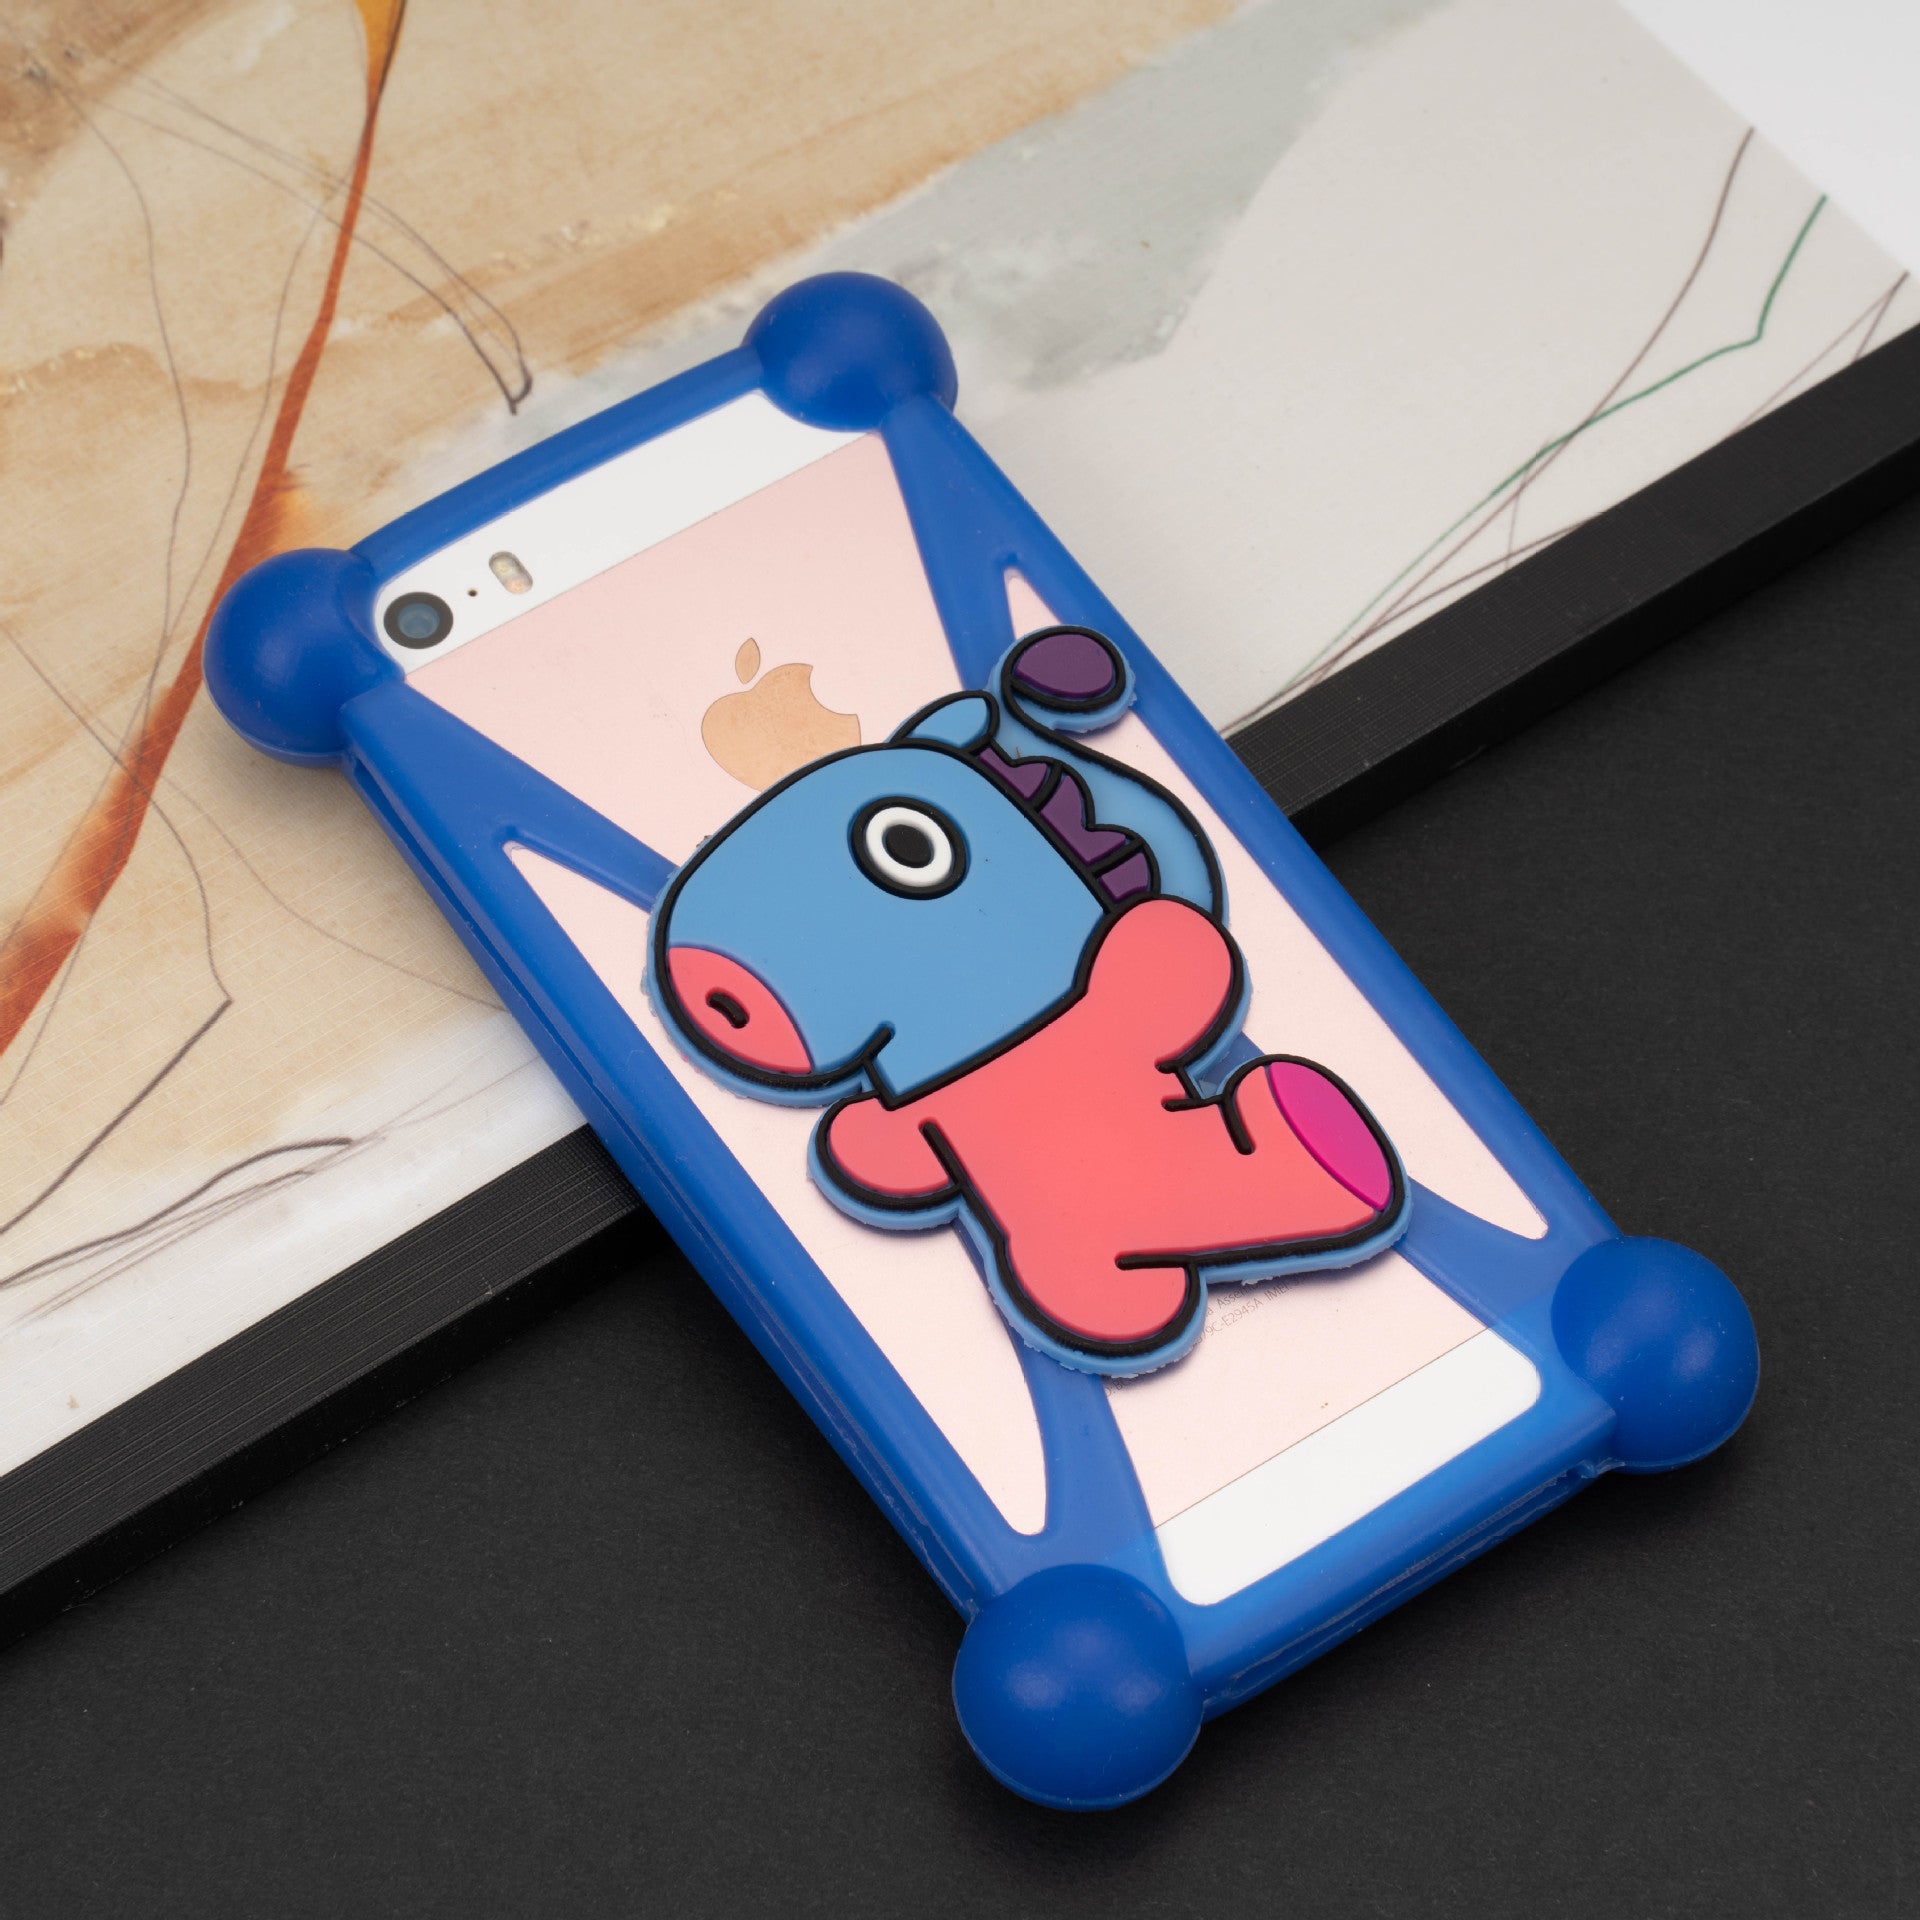 Youth League Mobile Phone Case 